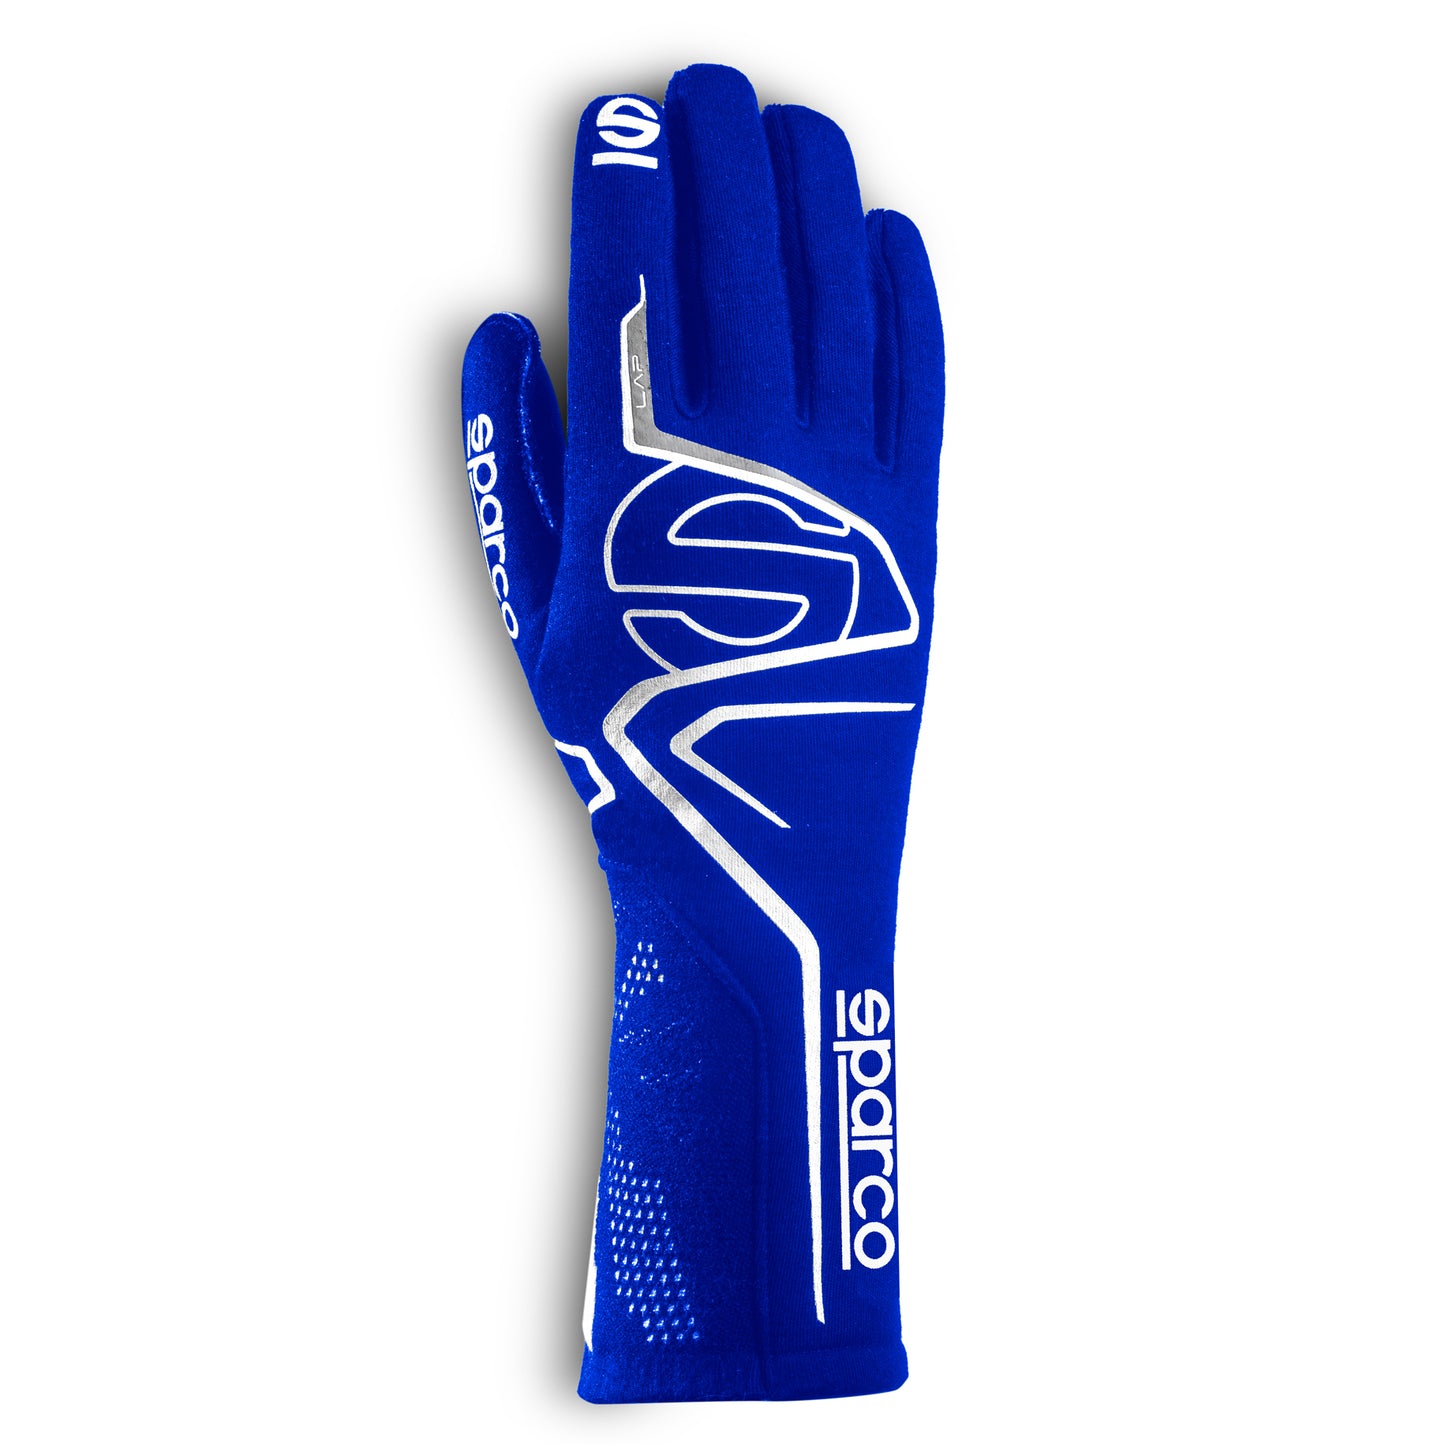 001316 Sparco Lap Racing Gloves Fireproof Motorsport FIA Approved Race Rally